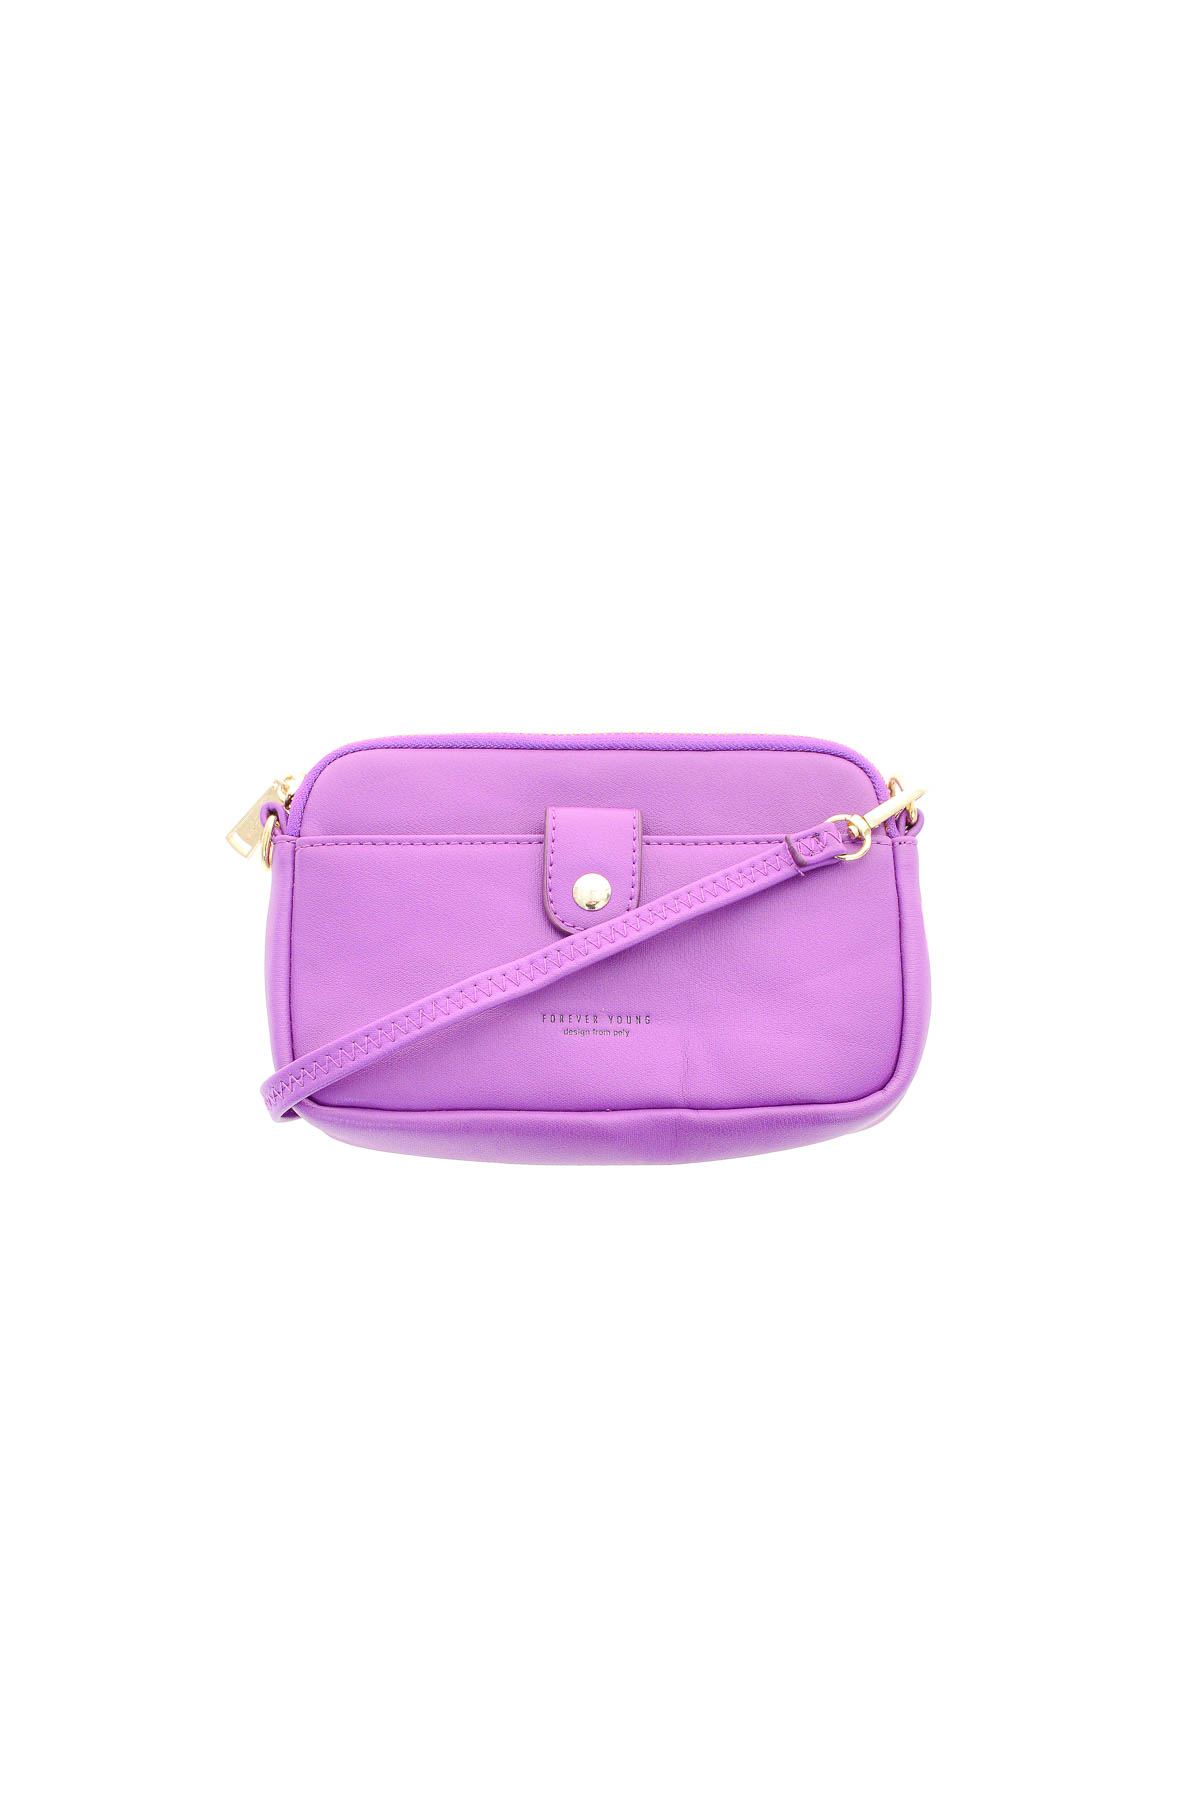 Women's bag - Forever Young - 0